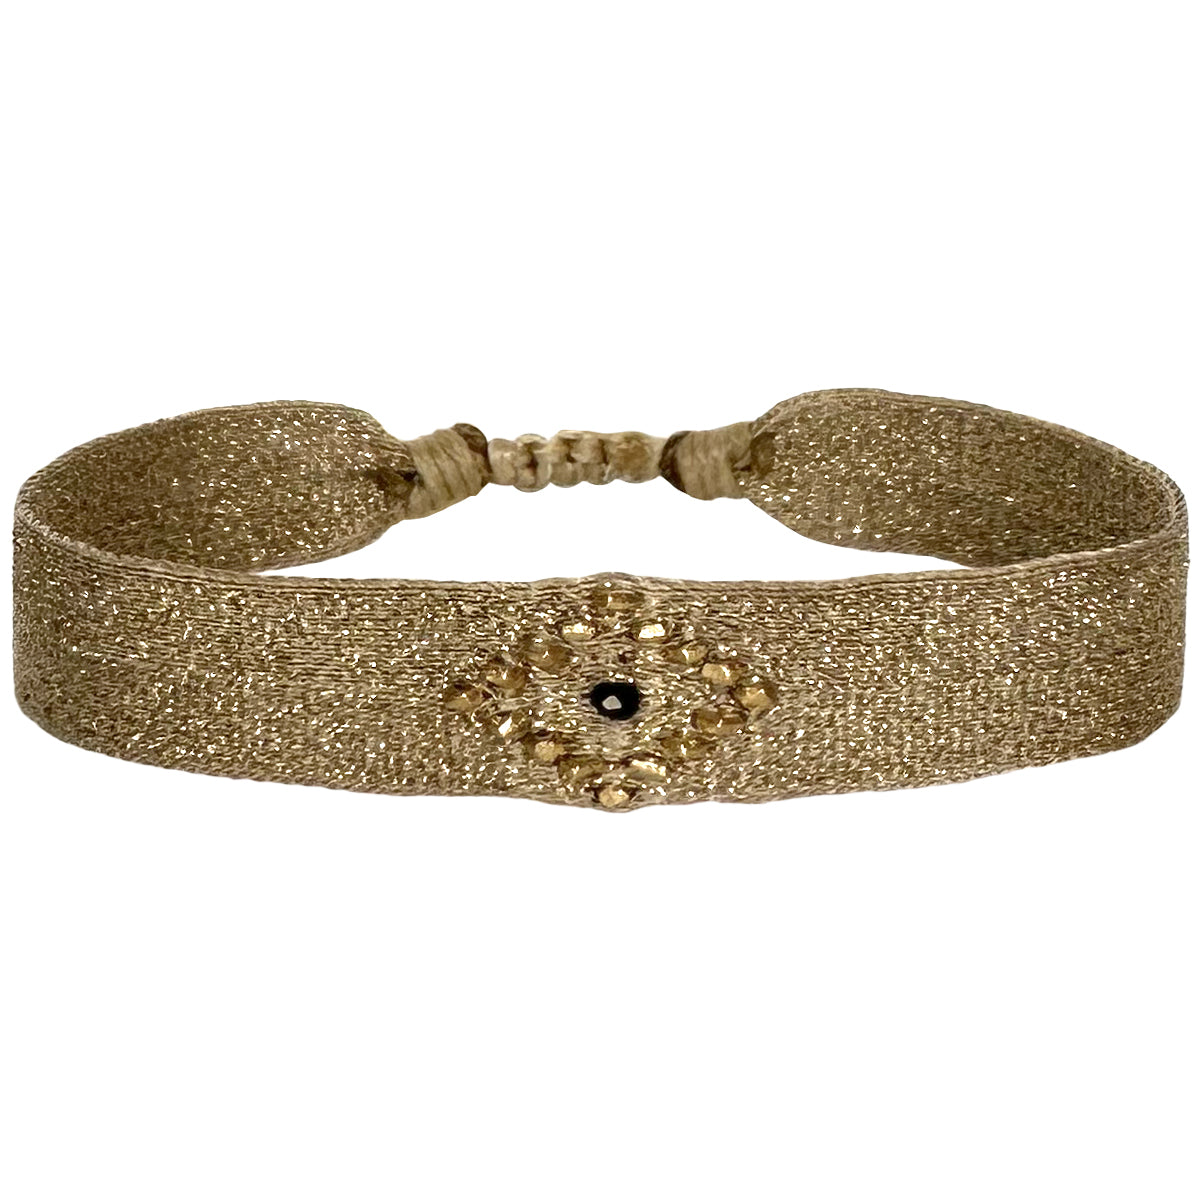 GOLDEN HANDWOVEN BRACELET FEATURING A SPINEL STONE AND GOLD DETAILS